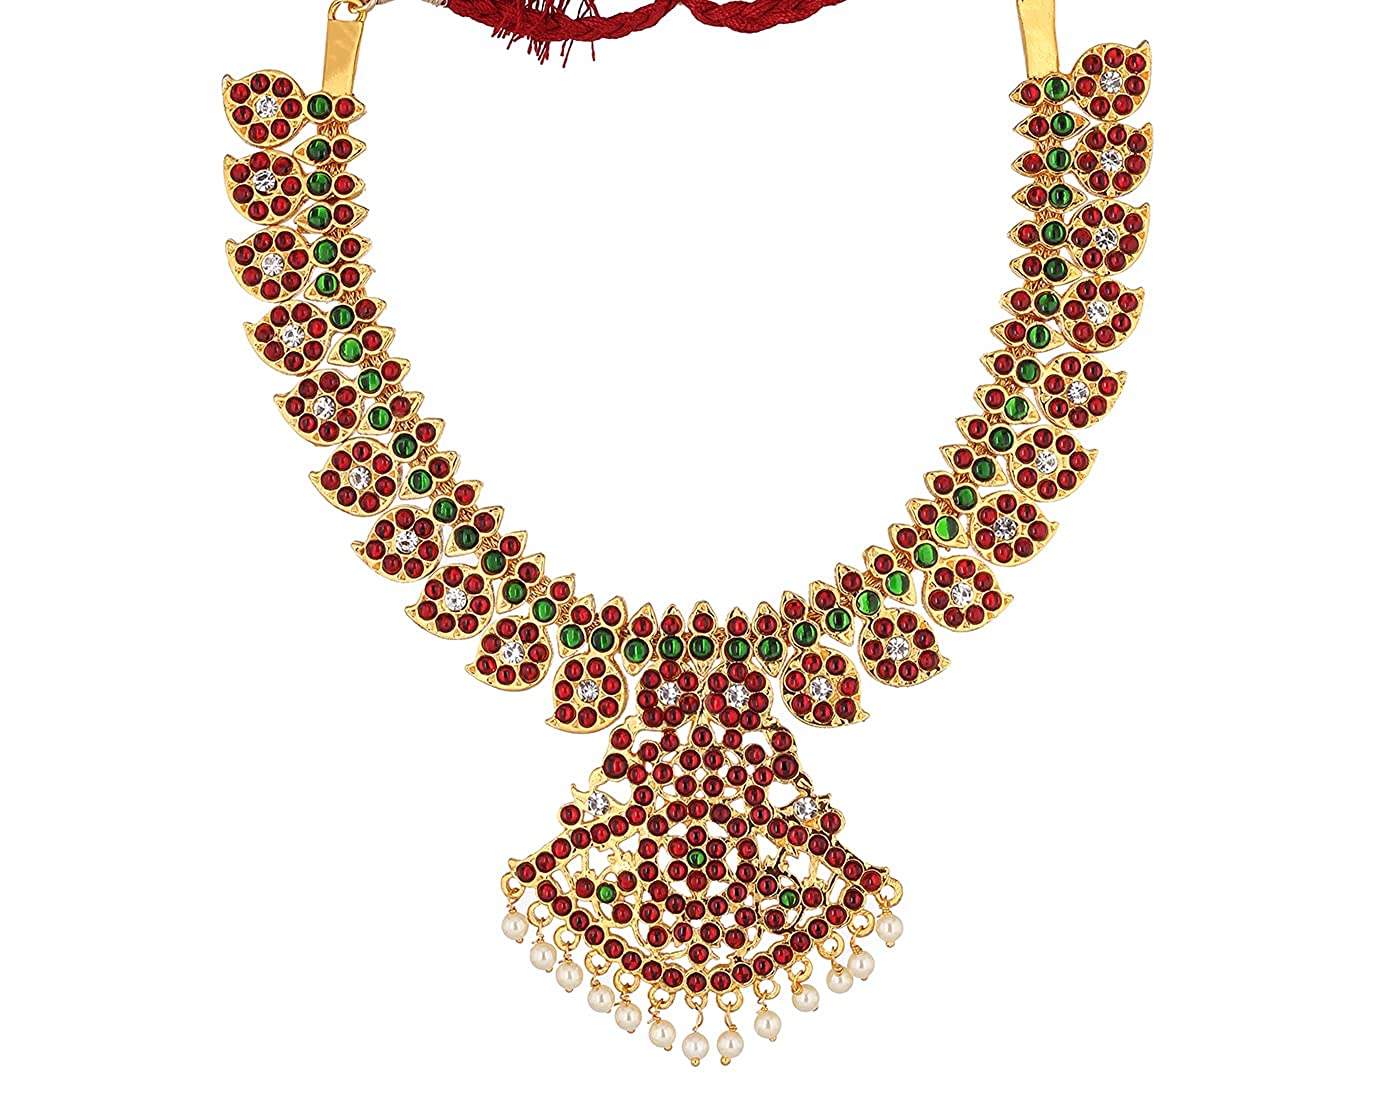 Goldencollections Regal Mango Temple Haram Necklace for Bharatanatyam